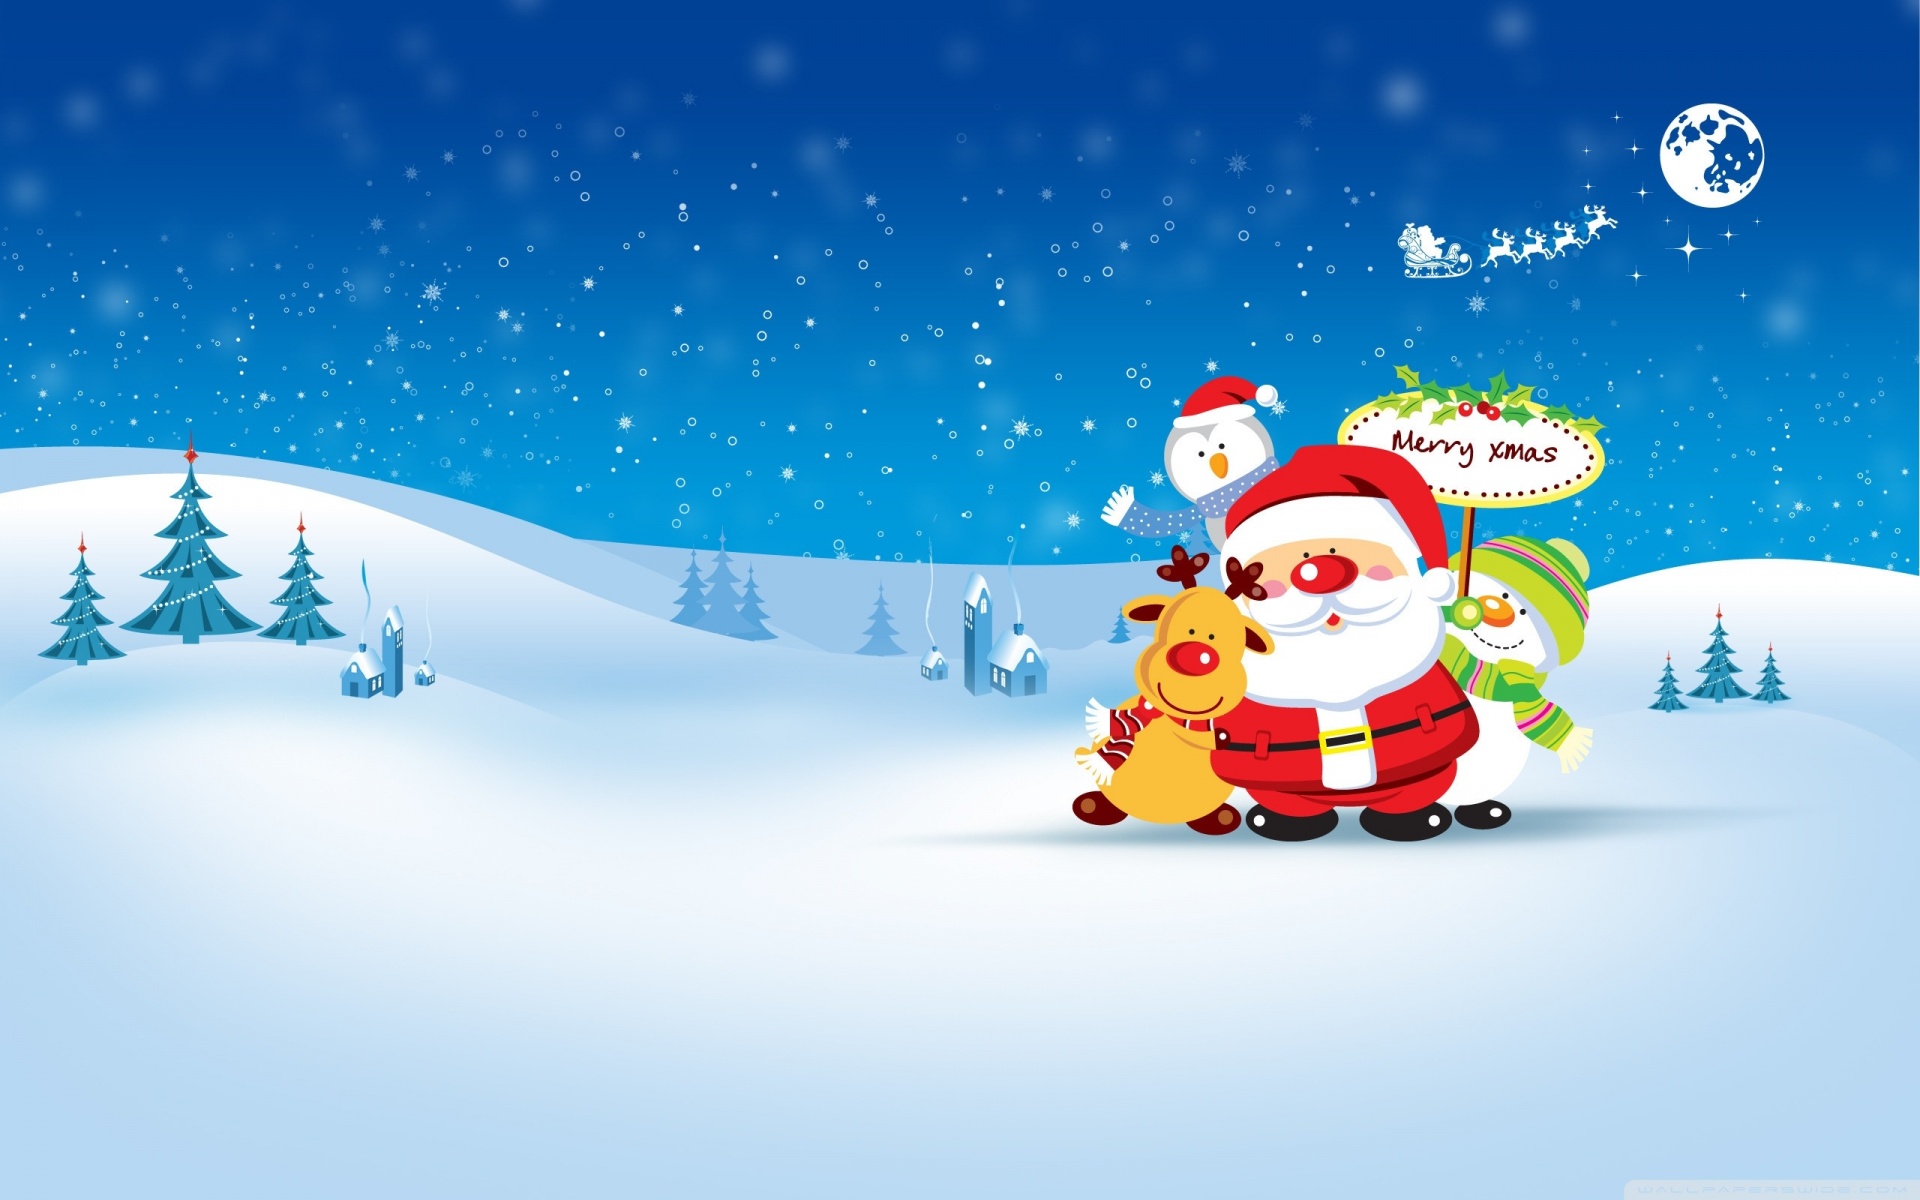 merry christmas wallpapers blue